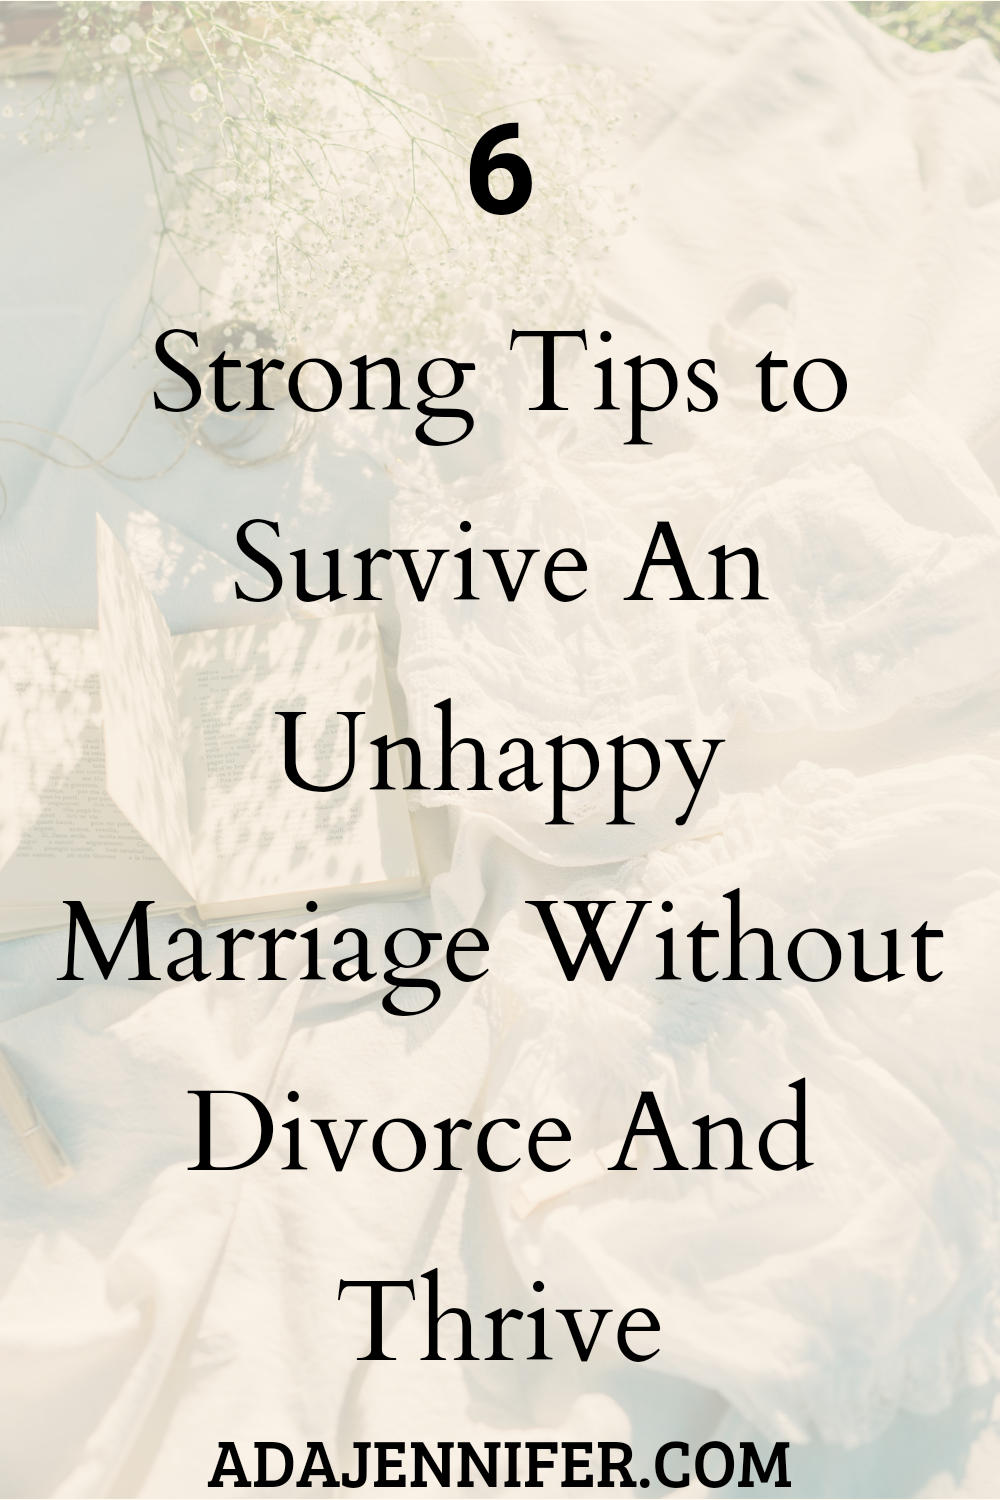 6 strong tips to survive an unhappy marriage without divorce and thrive